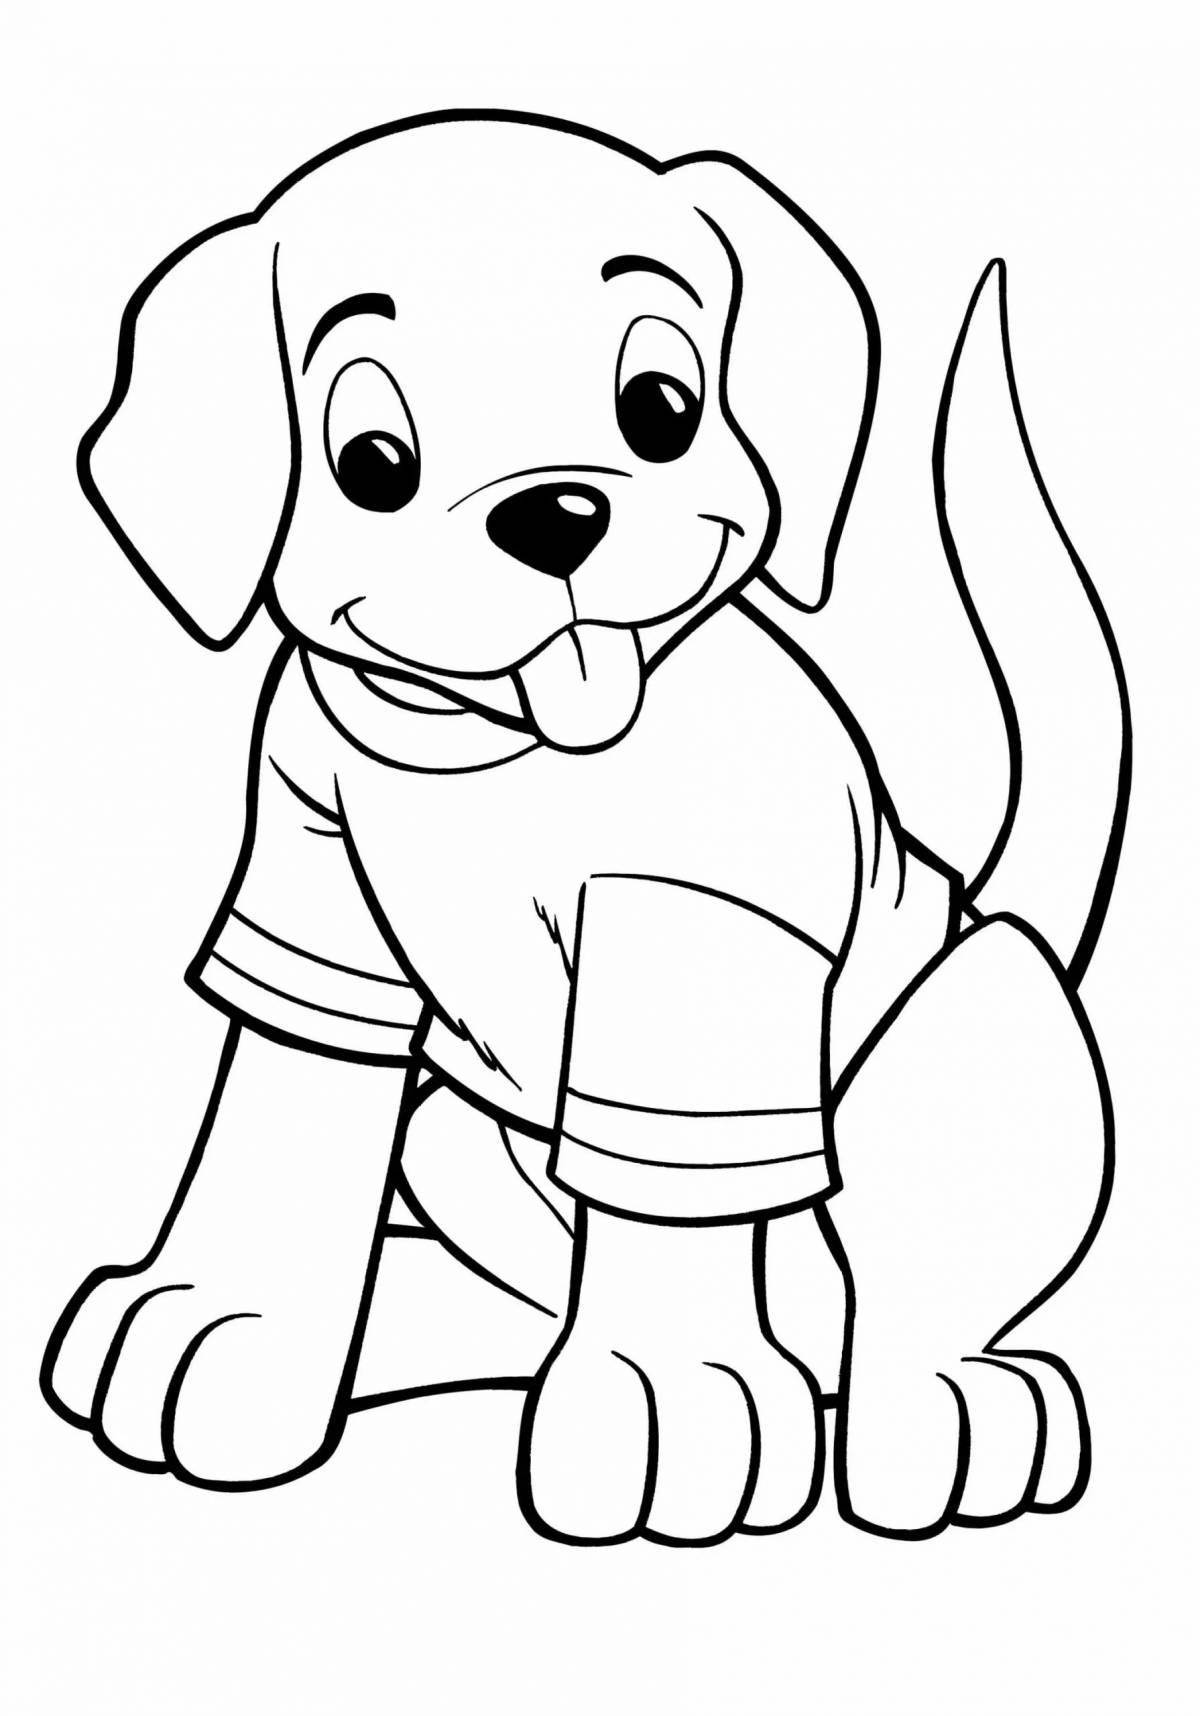 Sweet dog drawing for kids